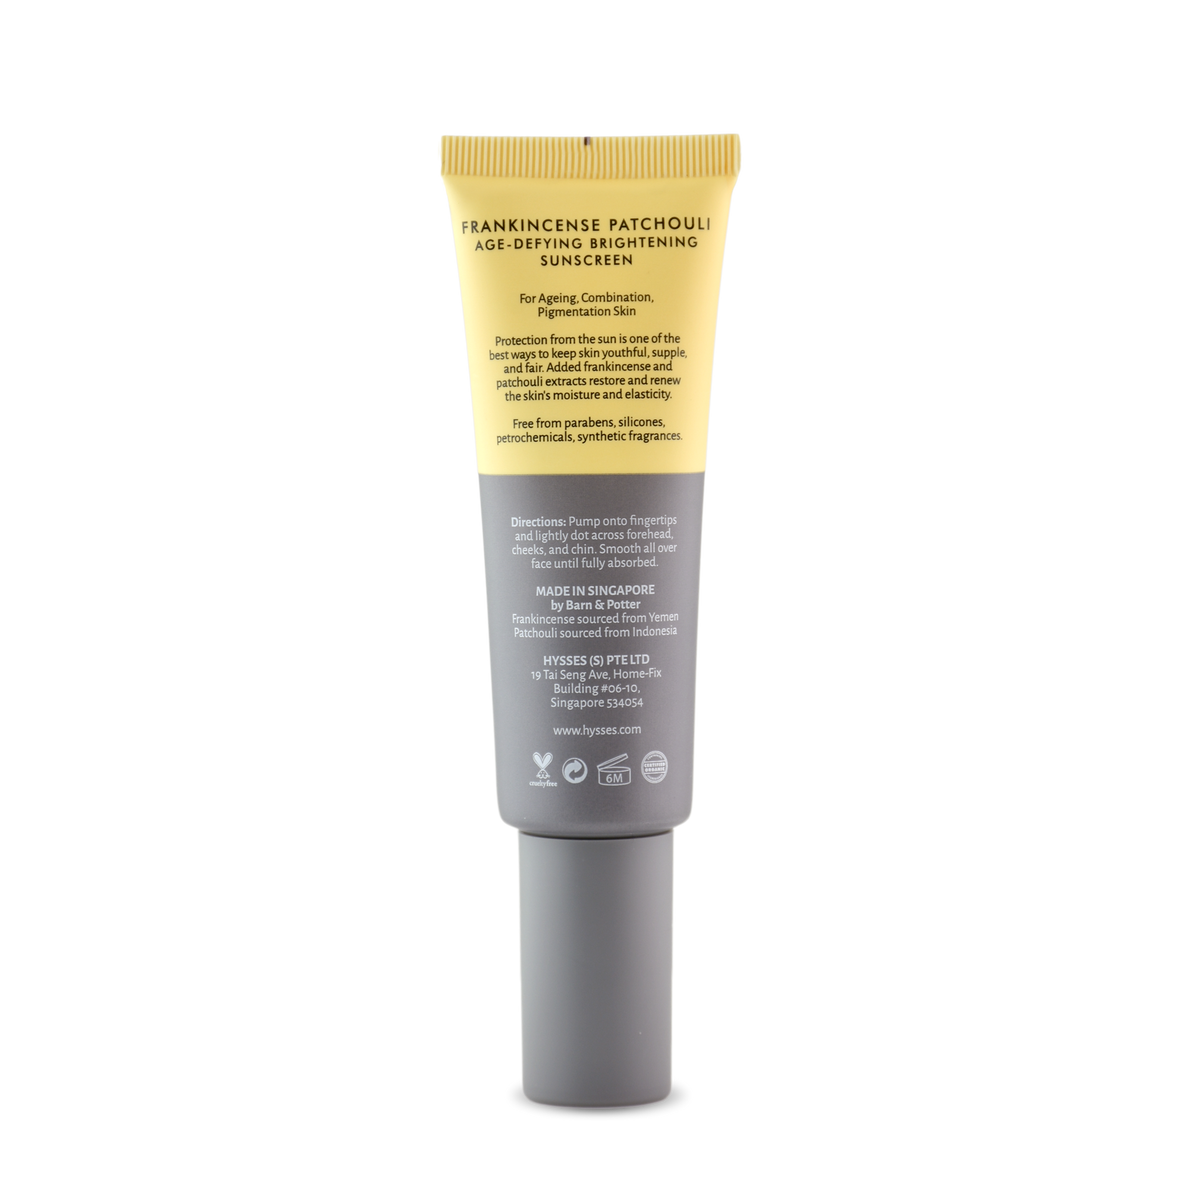 Age Defying Brightening Sunscreen Frankincense Patchouli SPF 40 / PA++ - HYSSES